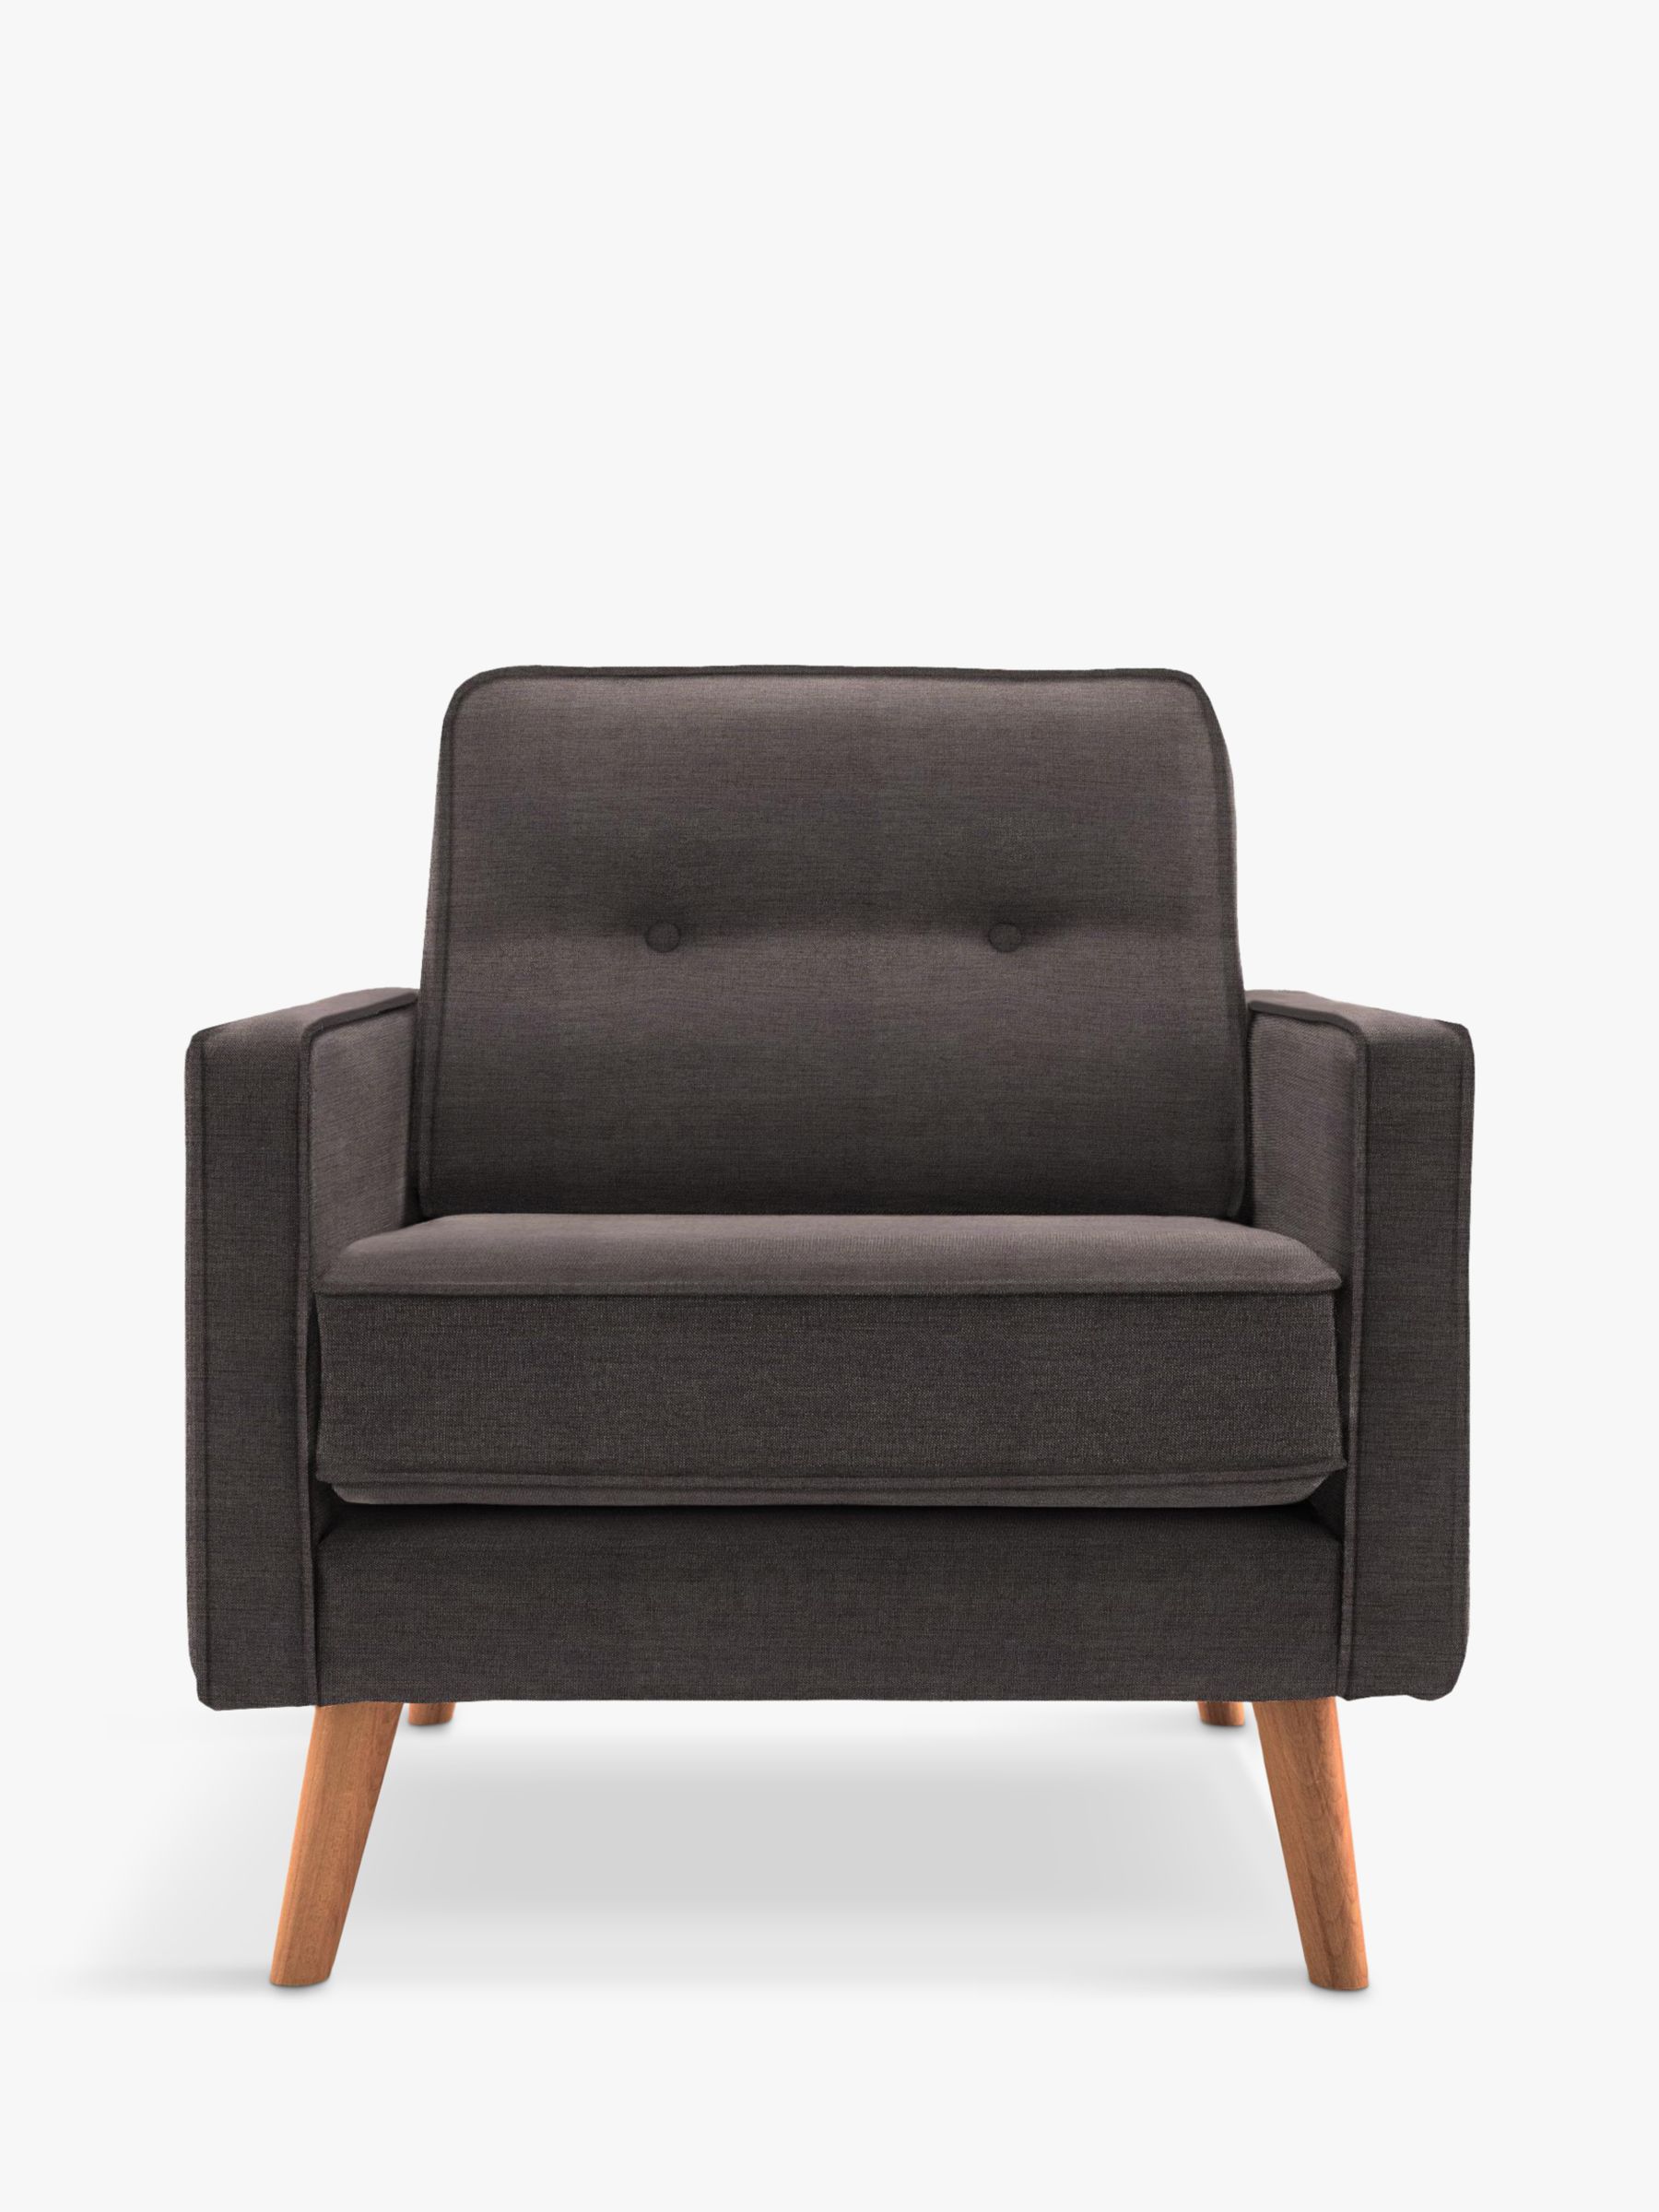 G Plan Vintage The Sixty Five Armchair